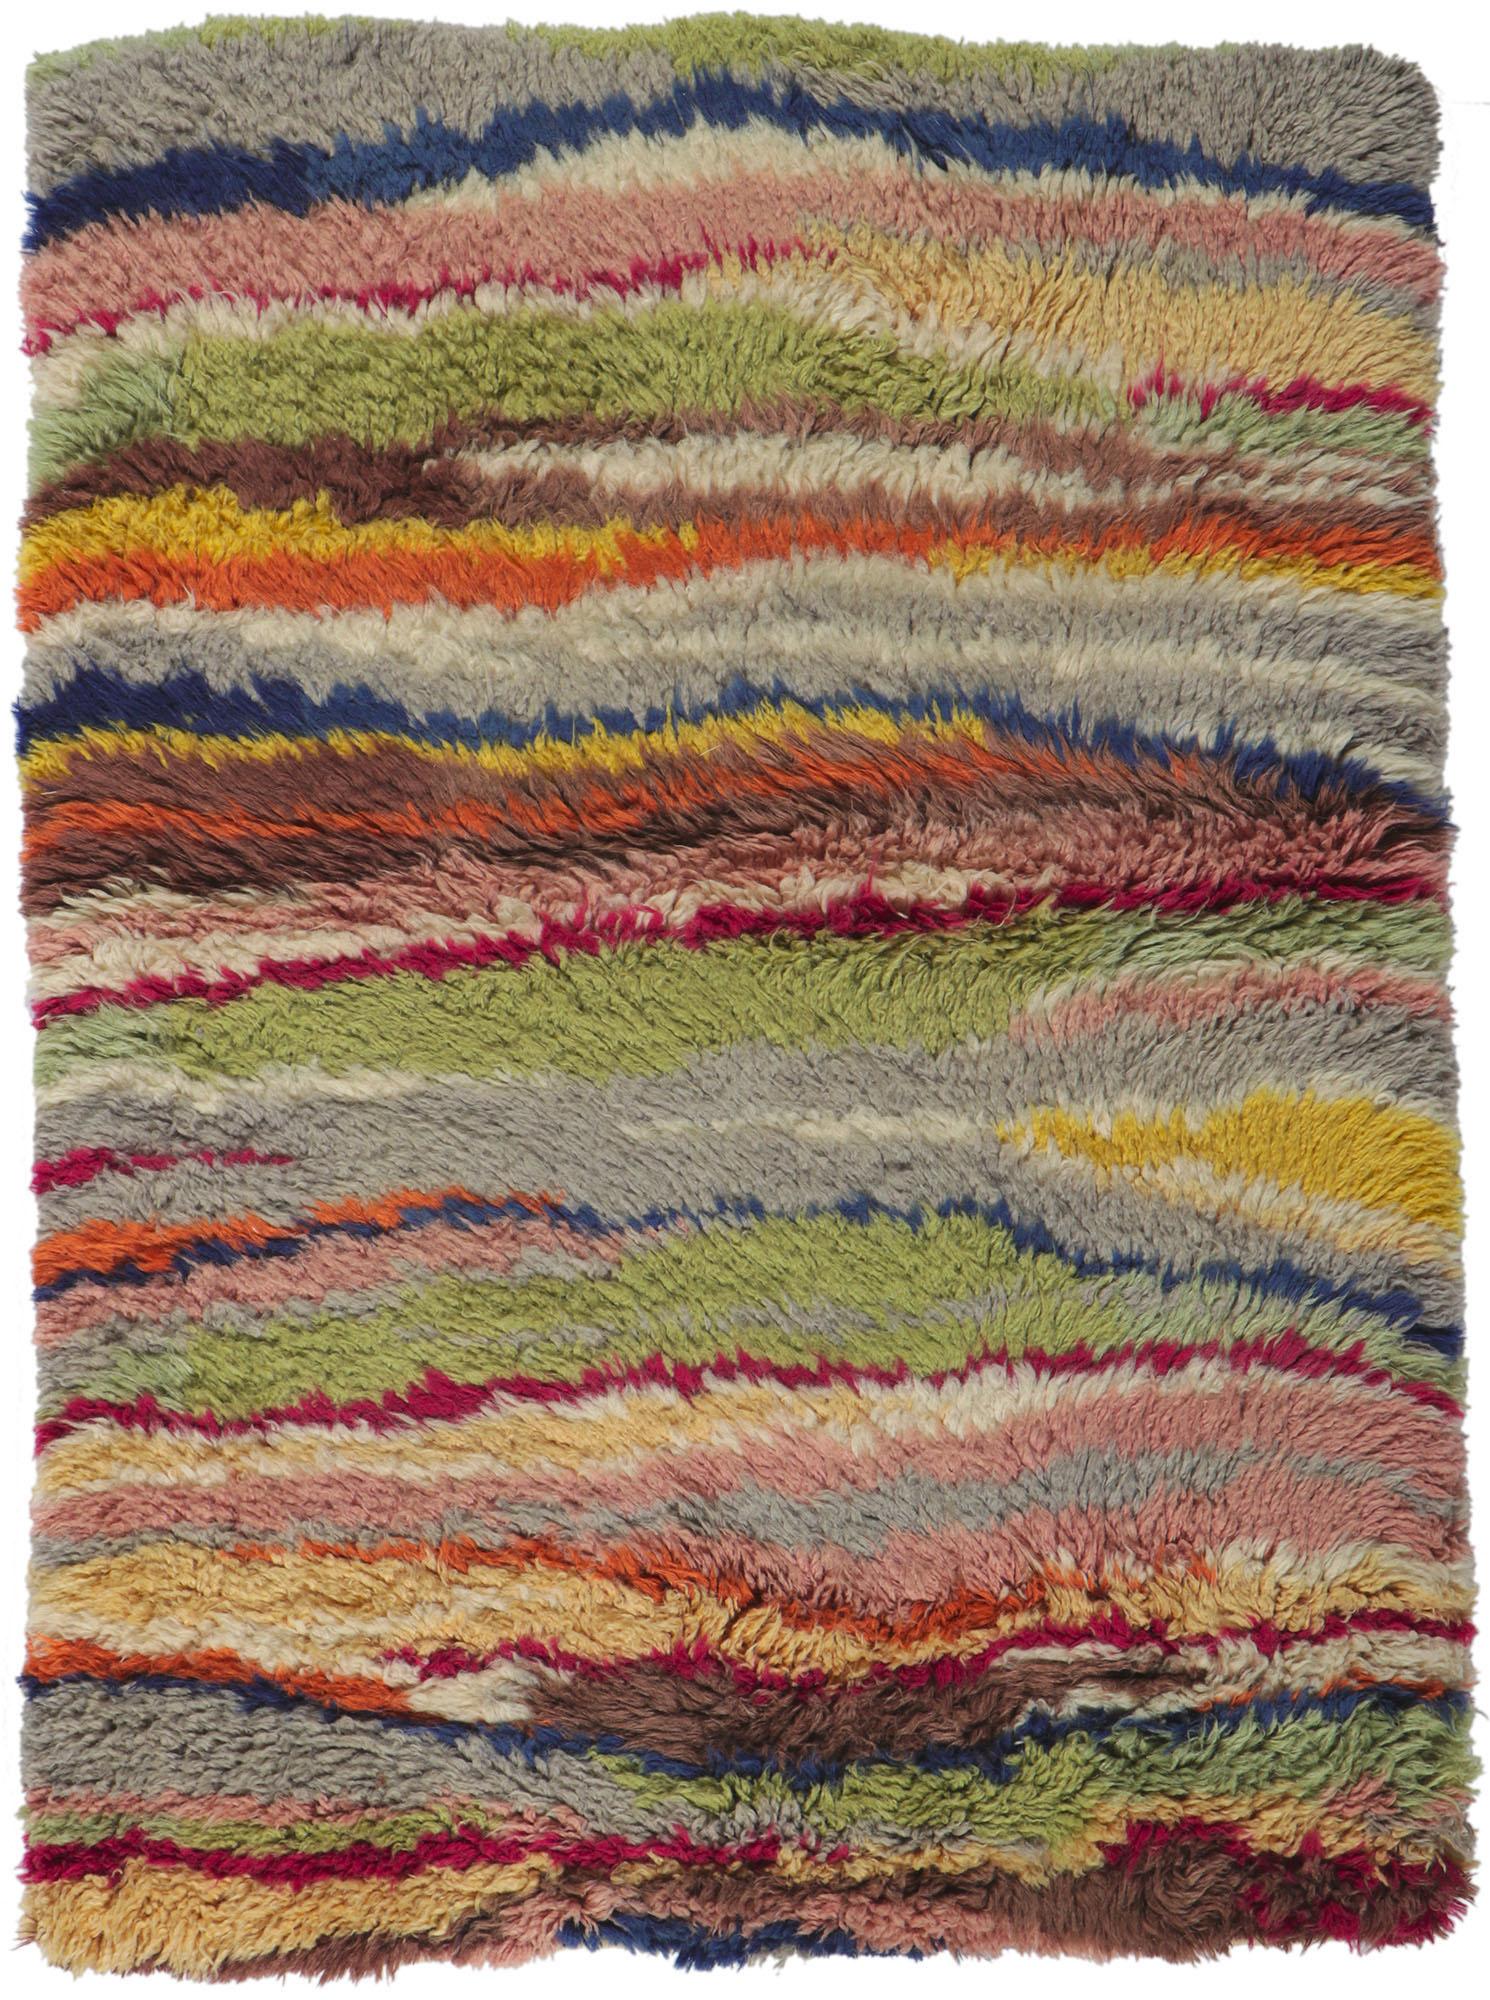 Vintage Swedish Rya Stripe Overlay Rug with Abstract Expressionist Style For Sale 2